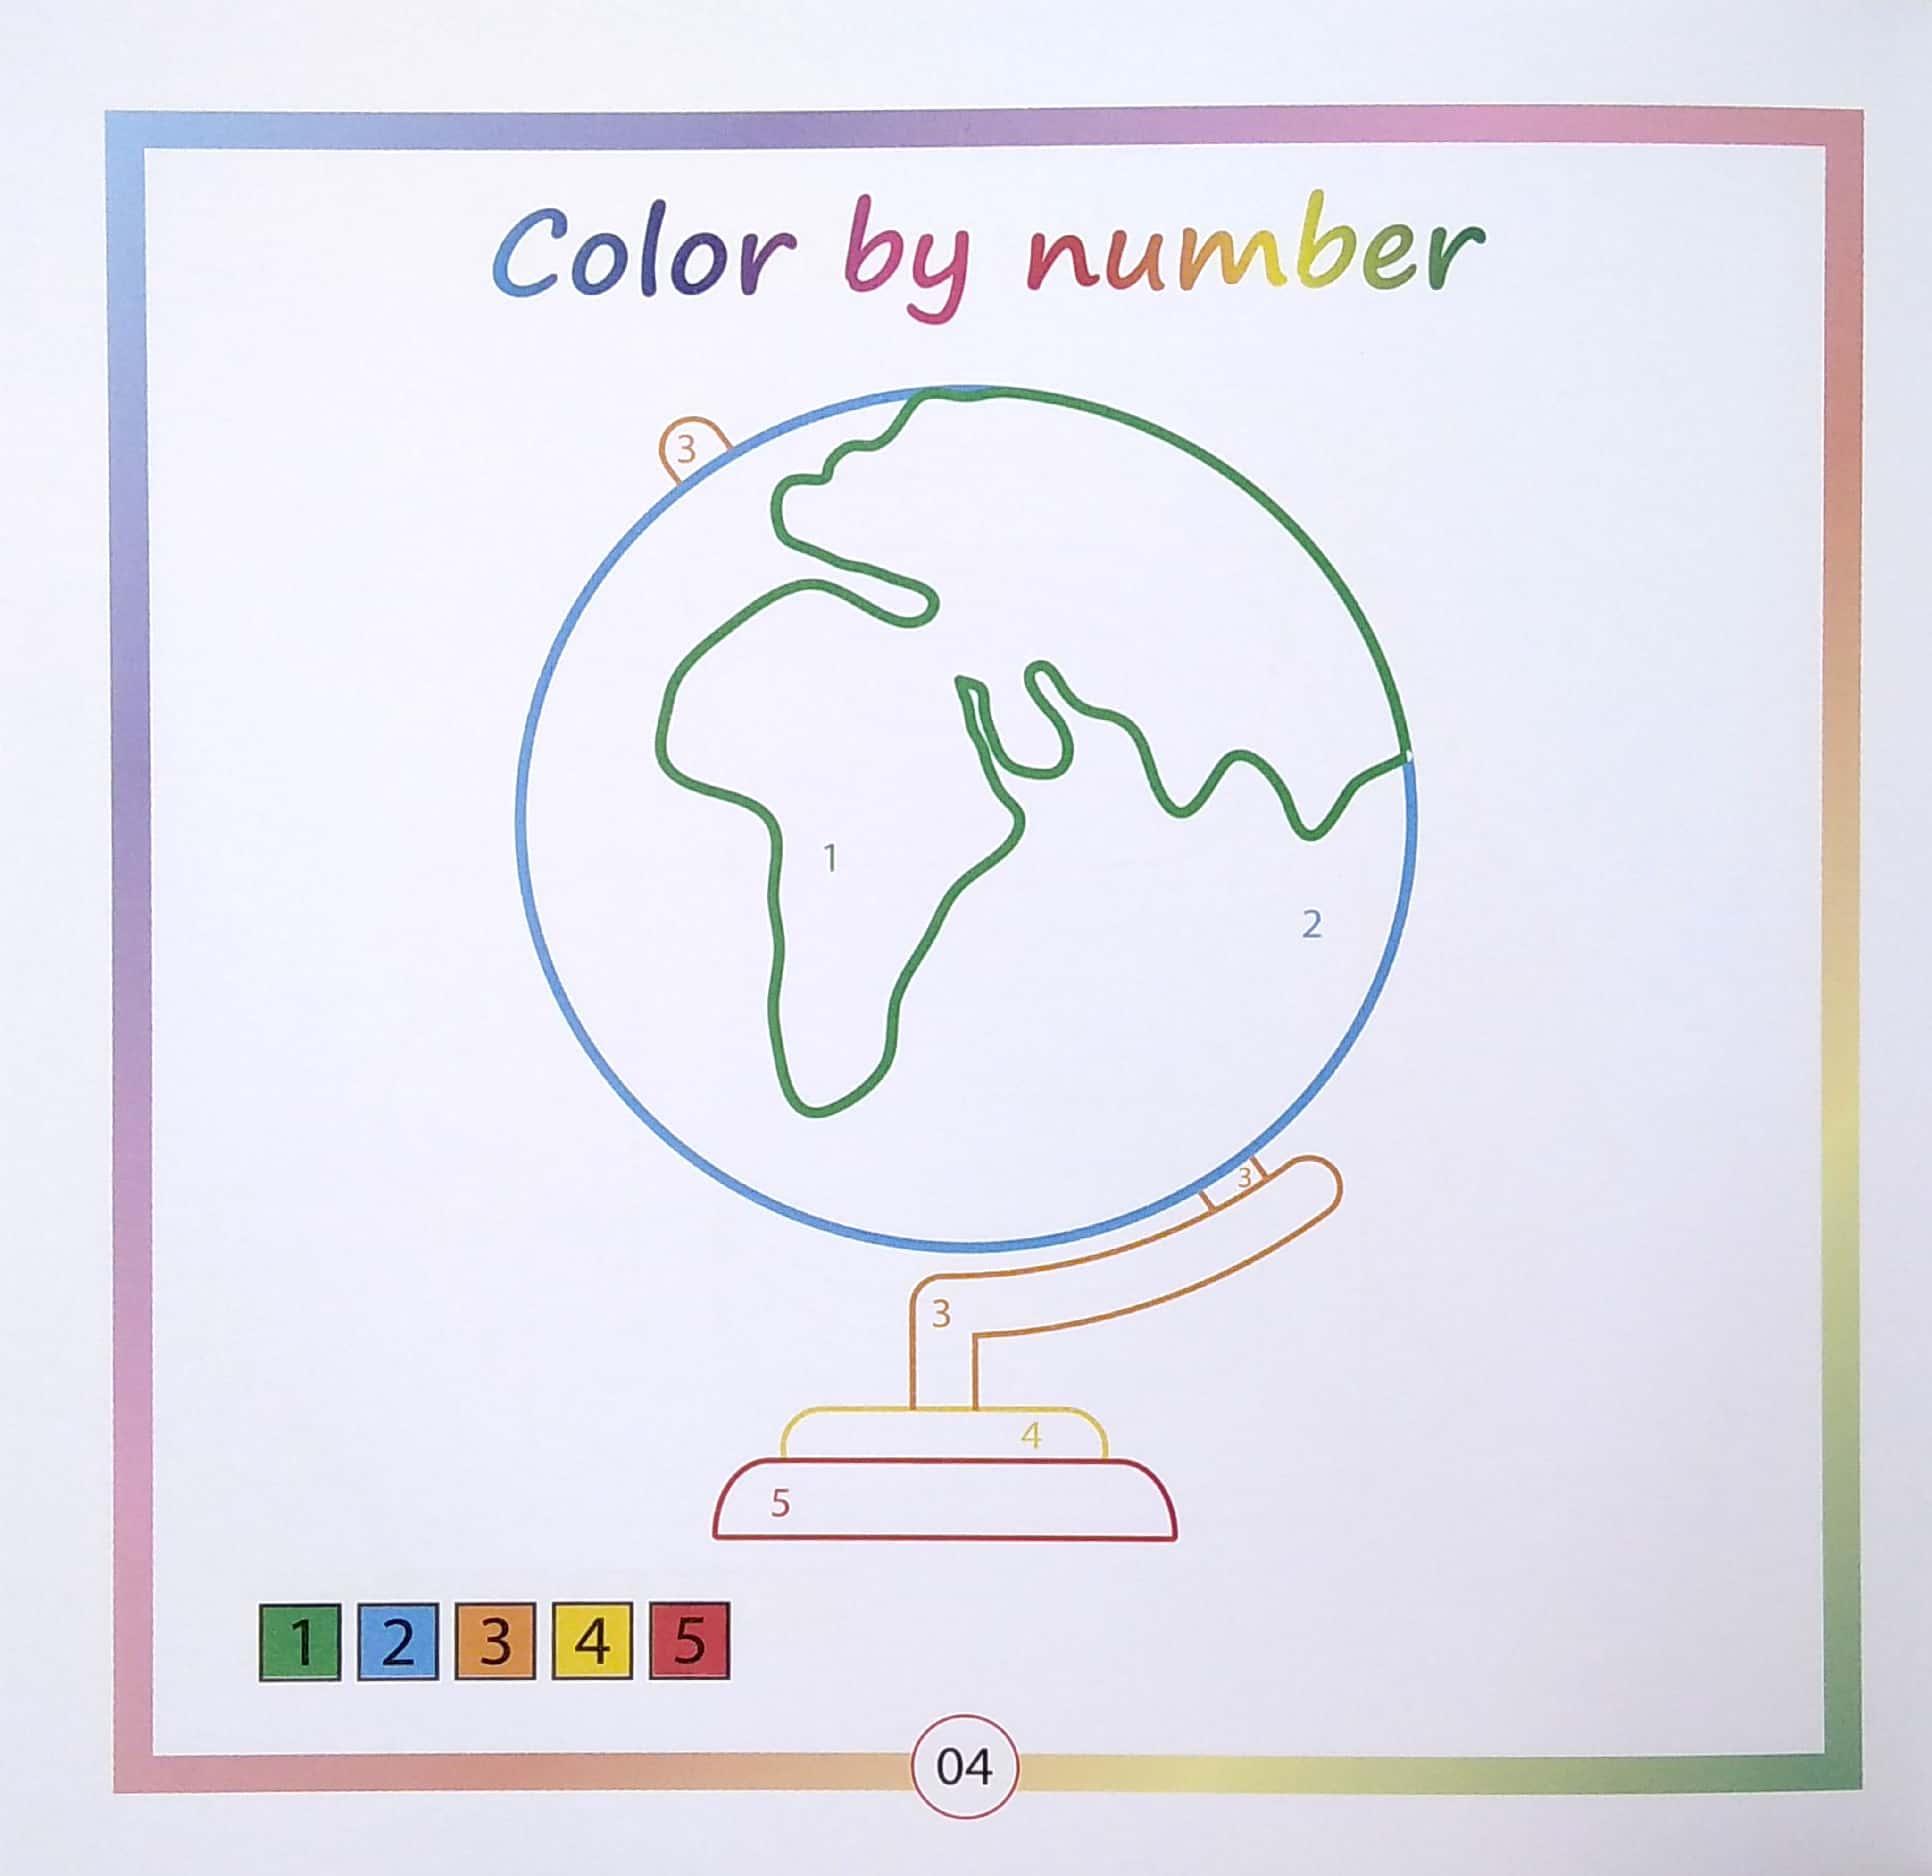 Color By Number - Tô Màu Theo Số -Tập 3